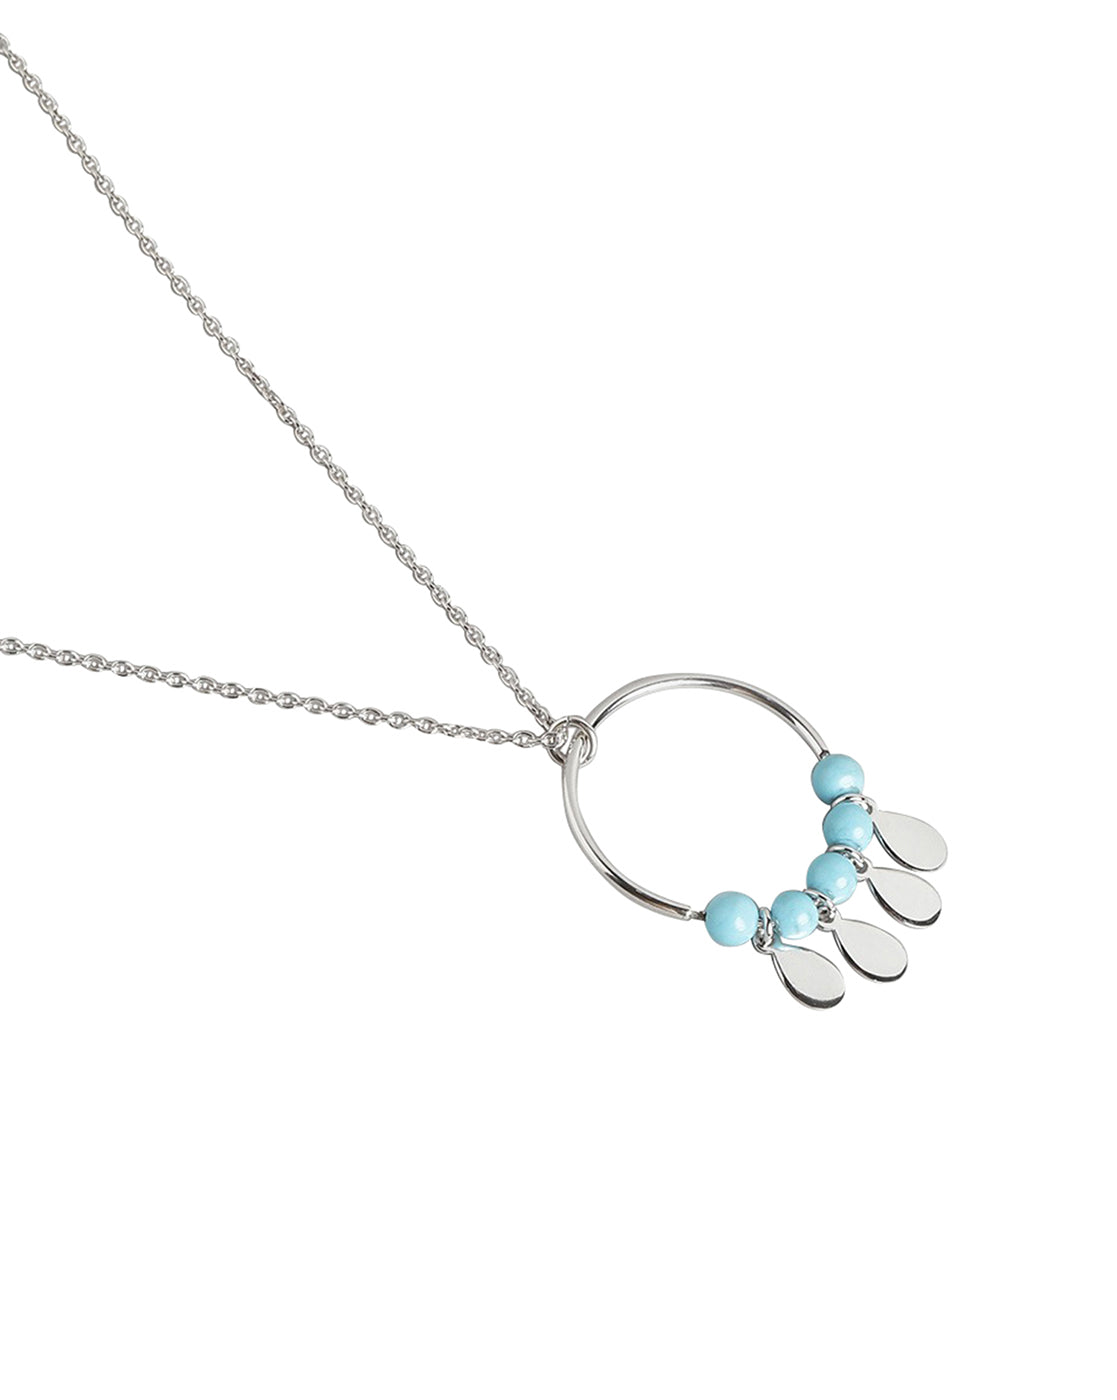 925 Sterling Silver Circle With Turquoise Bead And Dangling Drops Pendant With Chain &amp; Rhodium Plating